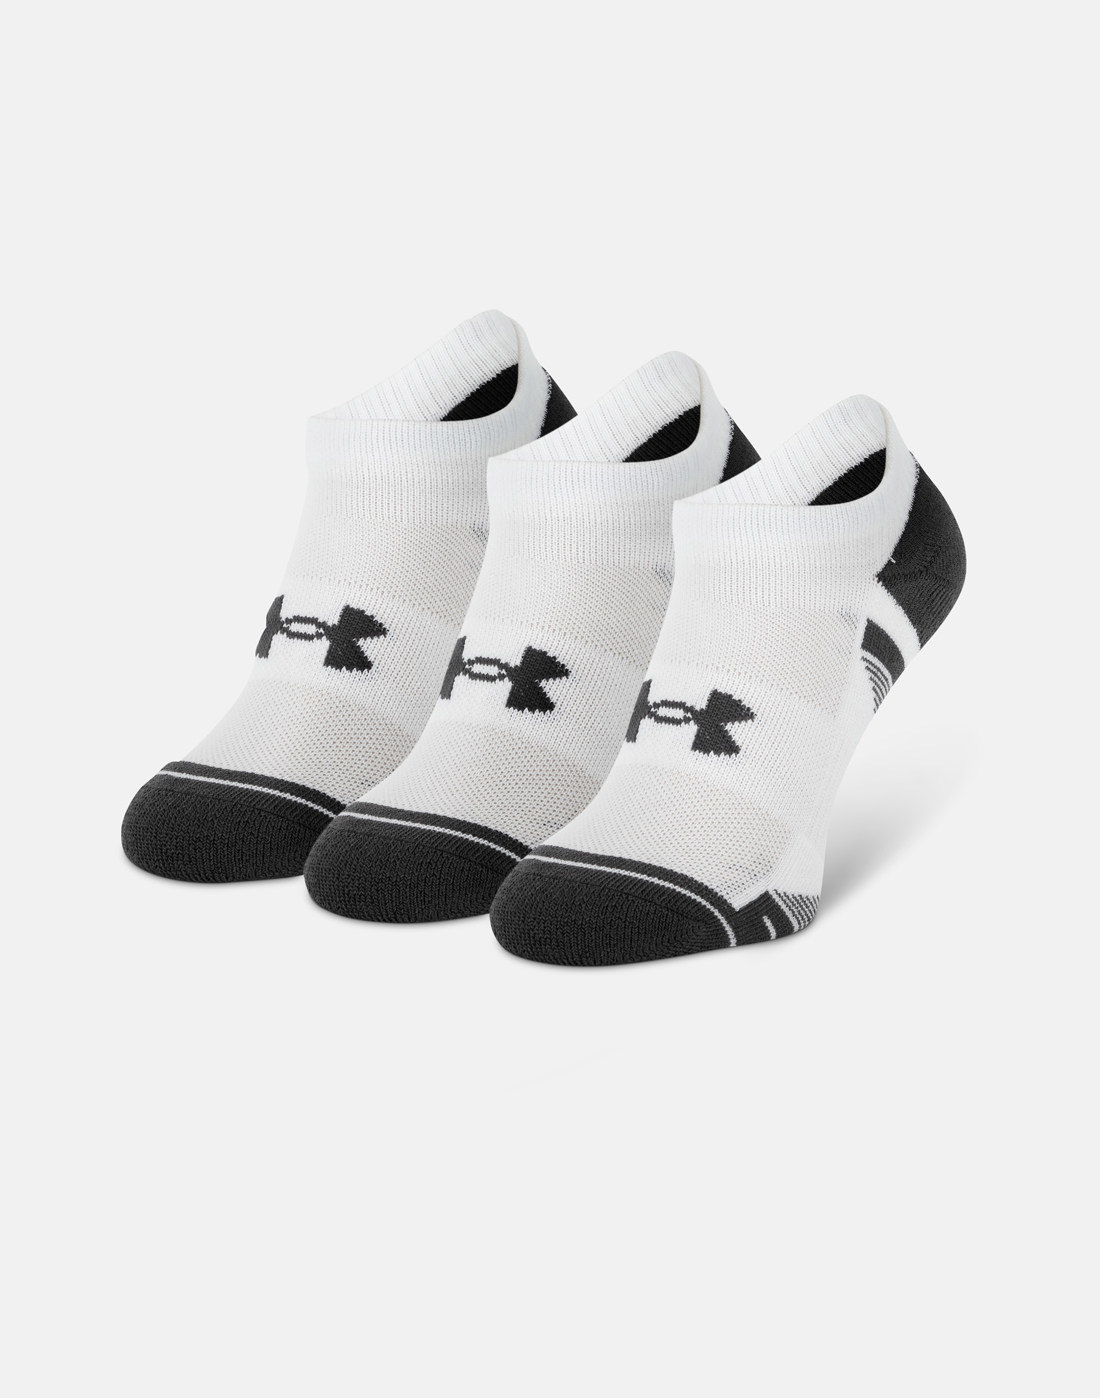 Under Armour Mens Tech 3 Pack No Show Socks - White | Life Style Sports IE